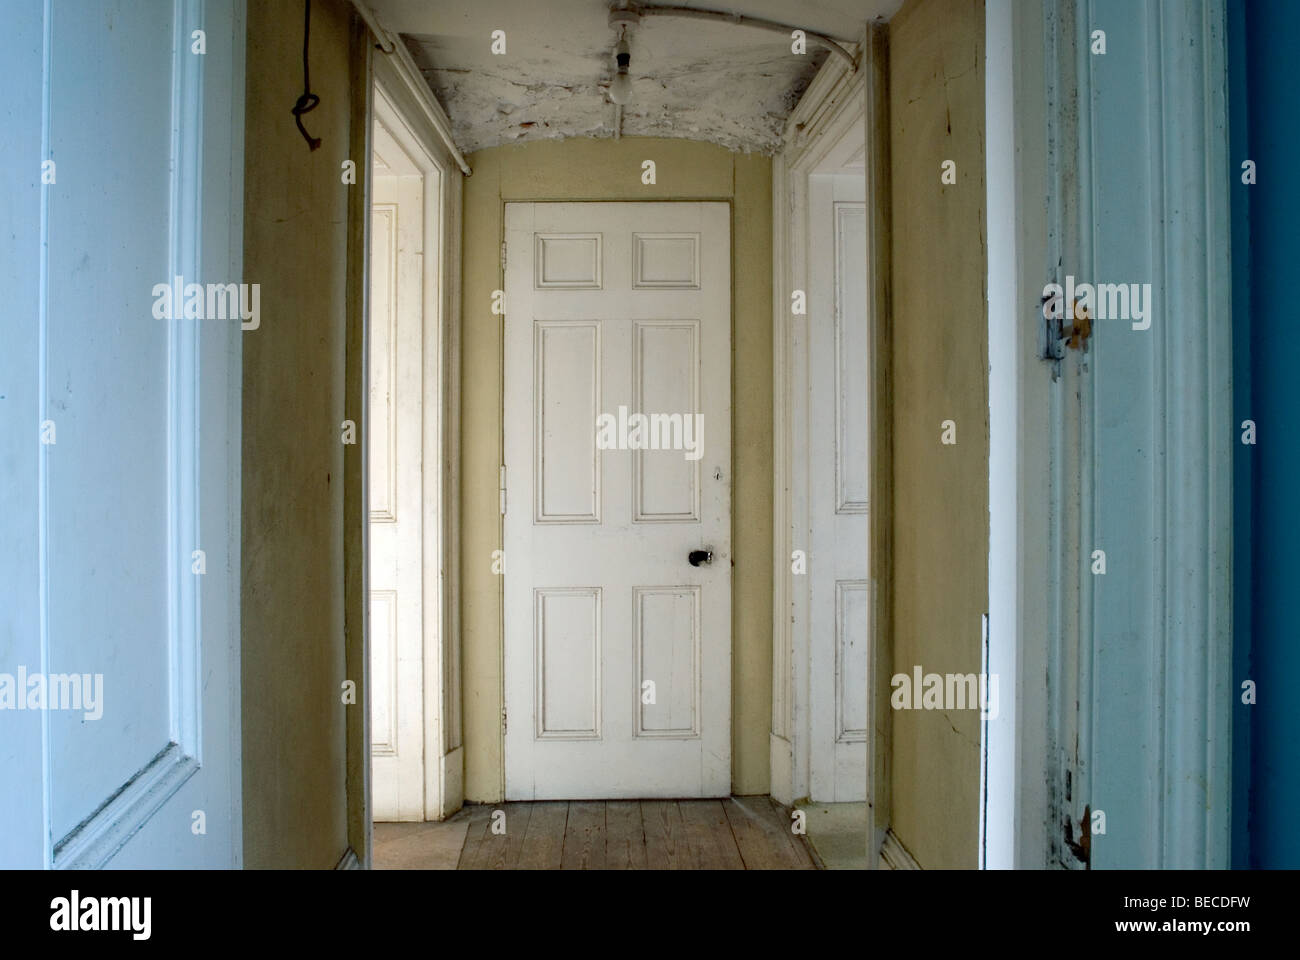 corridor leading up to a white door with other doorways off it in an old stately manor home in england Stock Photo